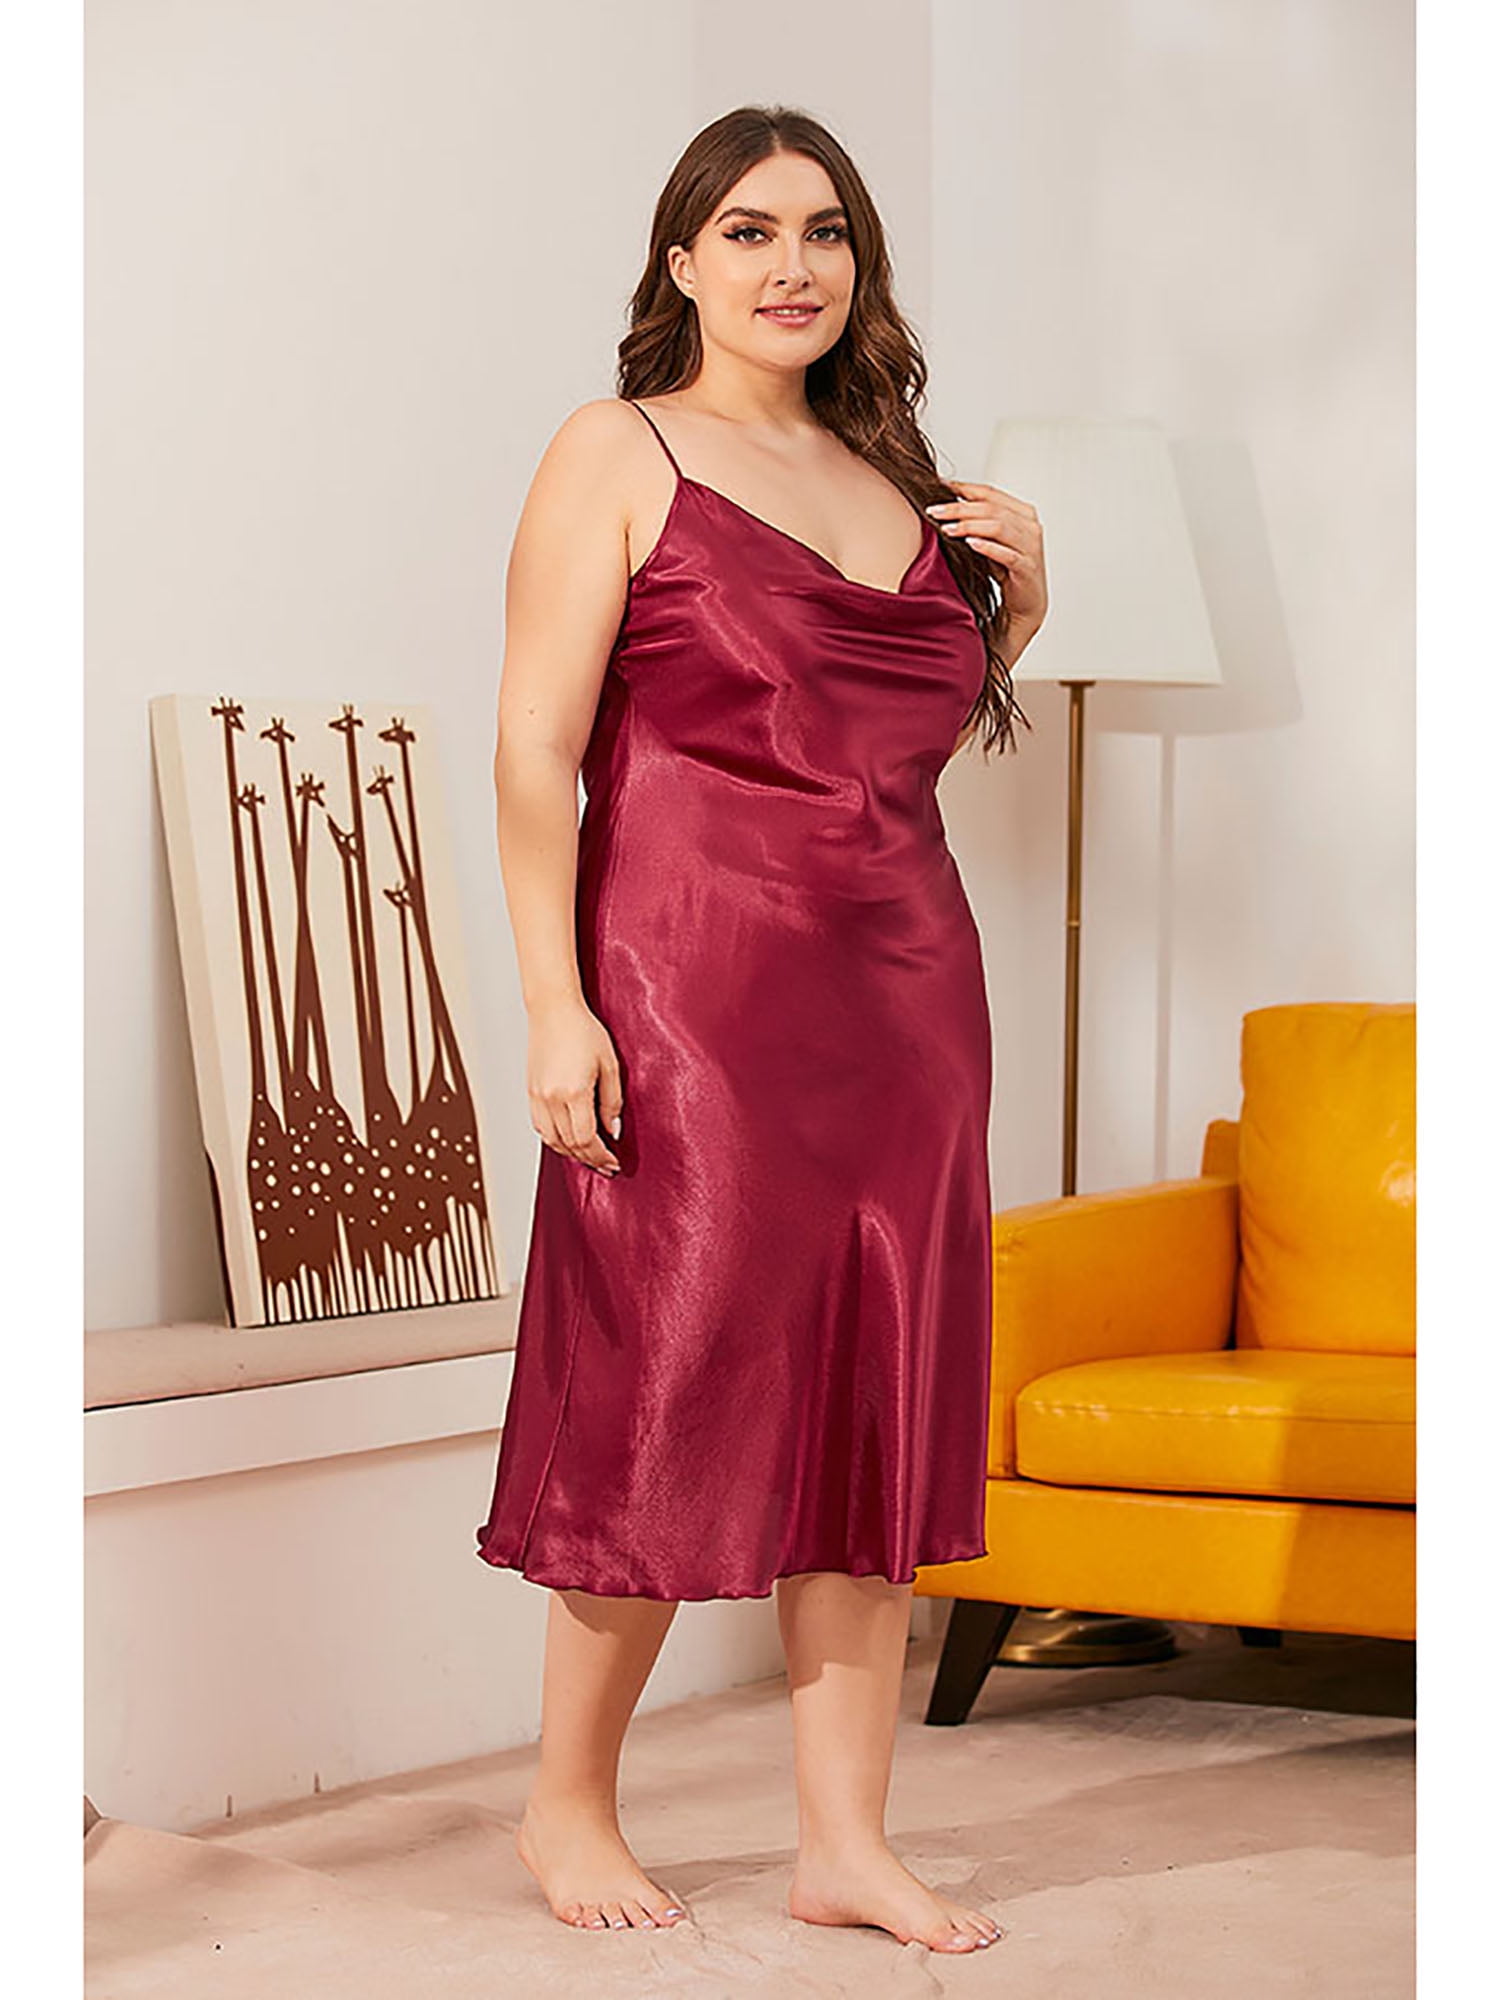 Plus Size Sleepwear For Your Body Type - ahead of the curve